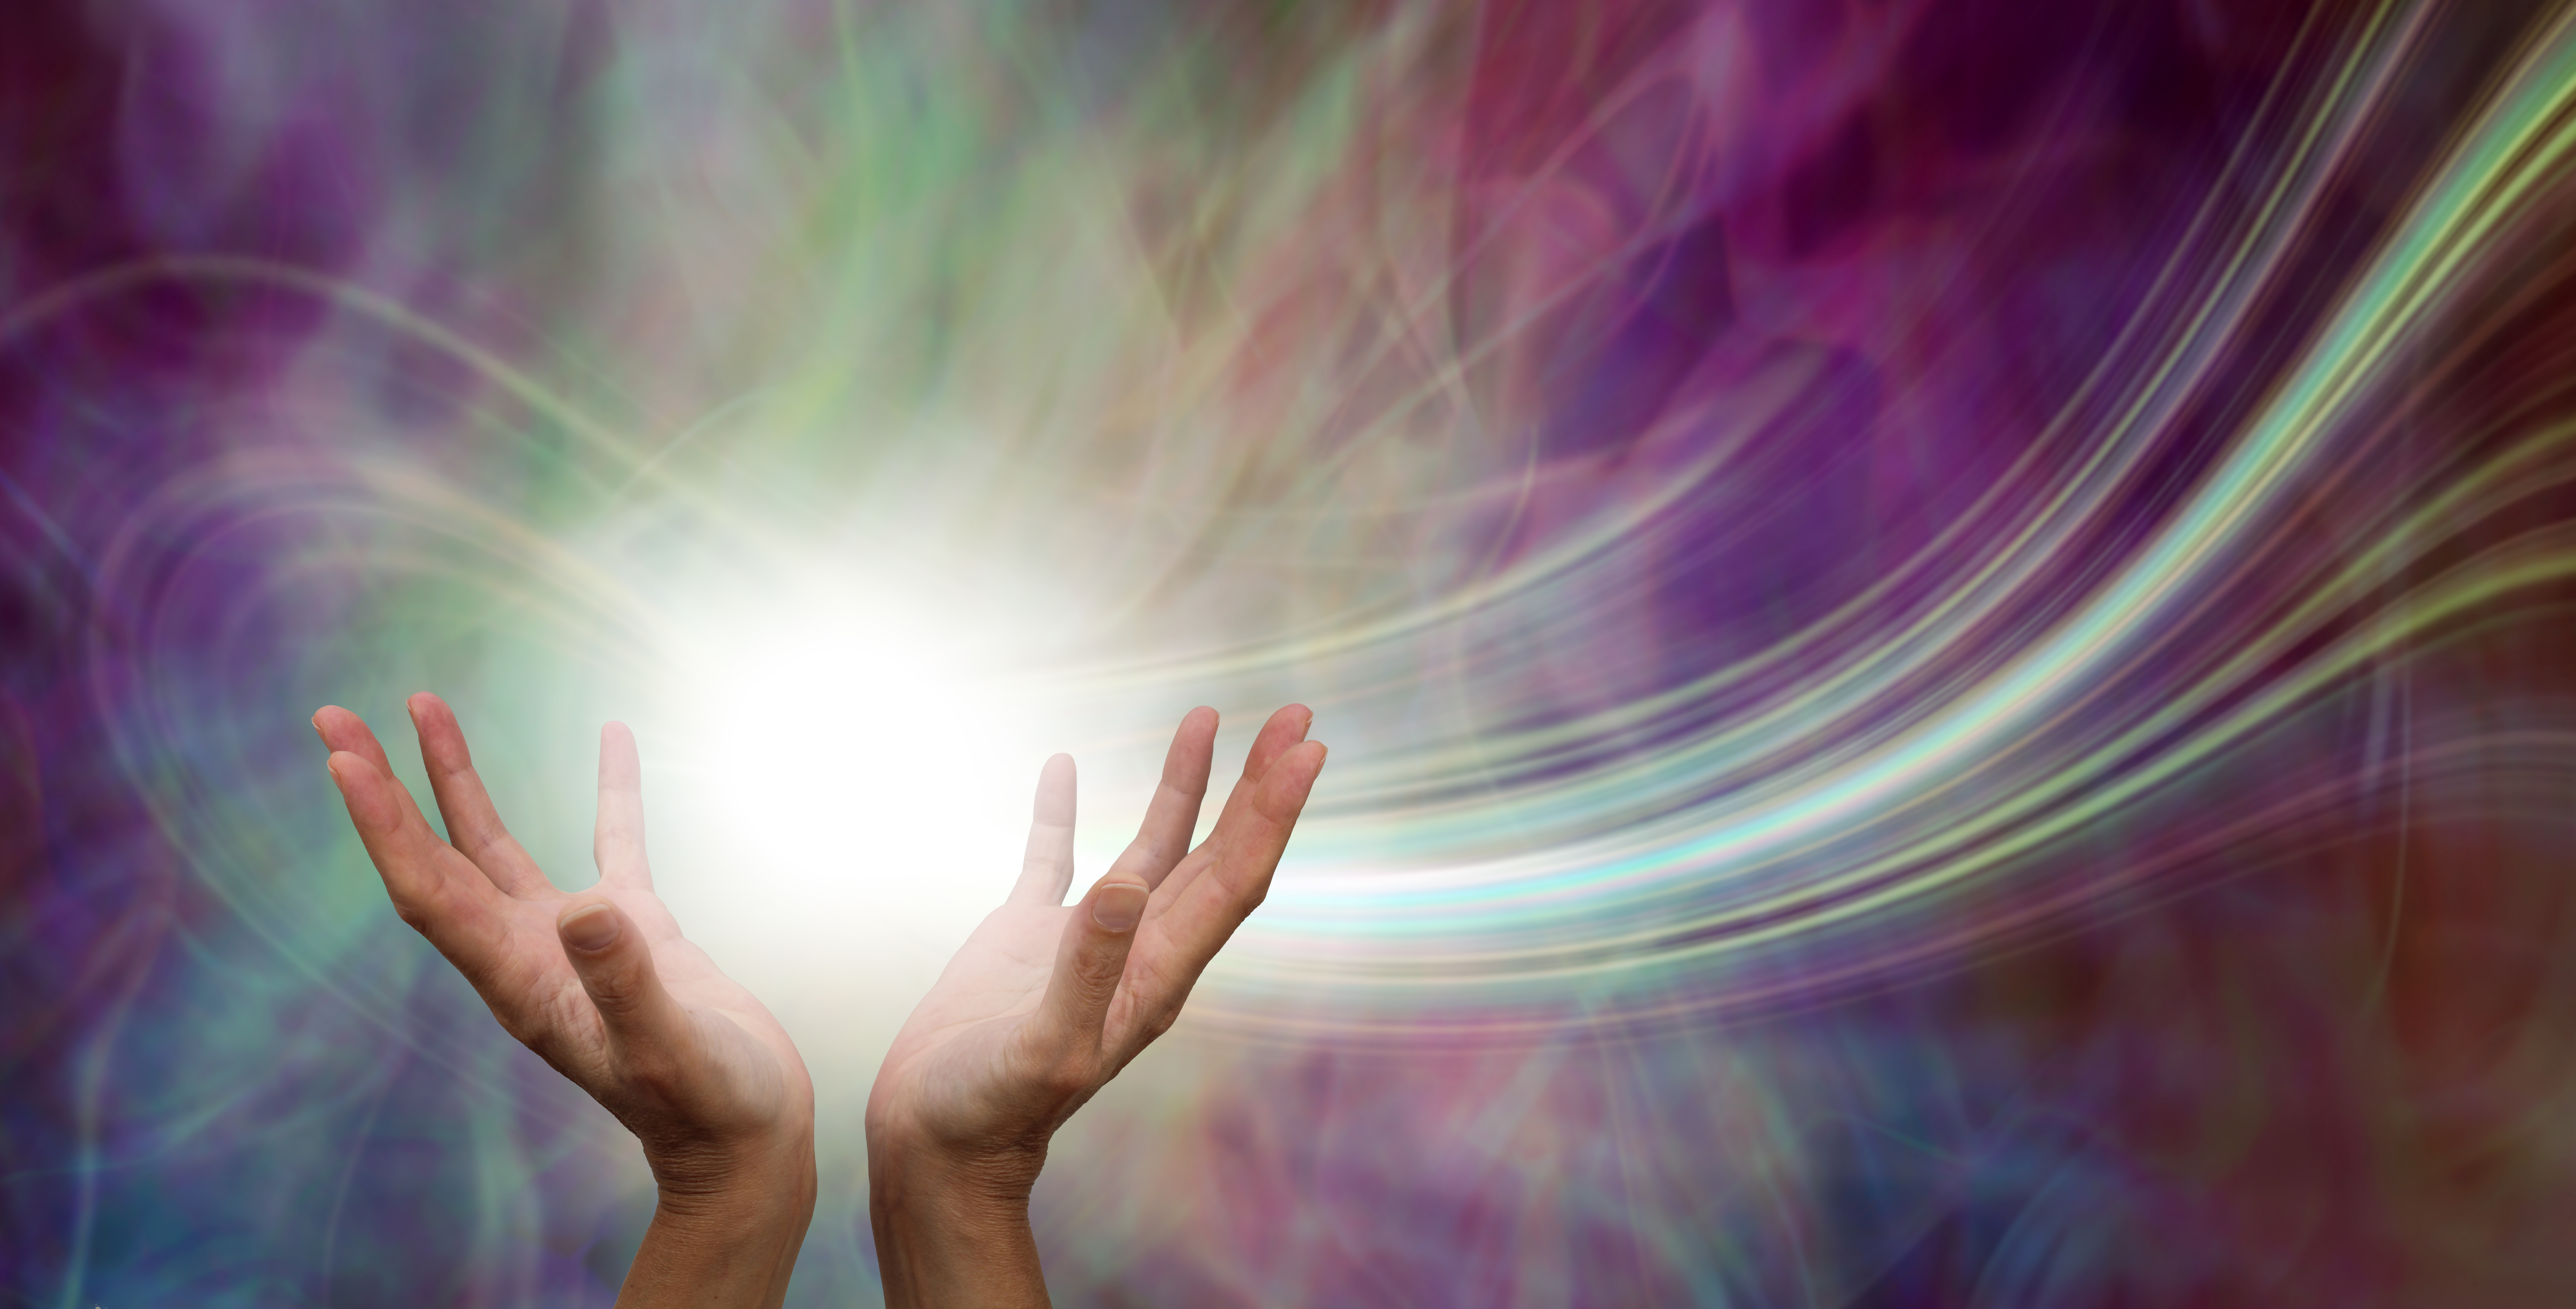 Hands reaching up into a ball of white energy with a laser trail and pink green ethereal energy field background